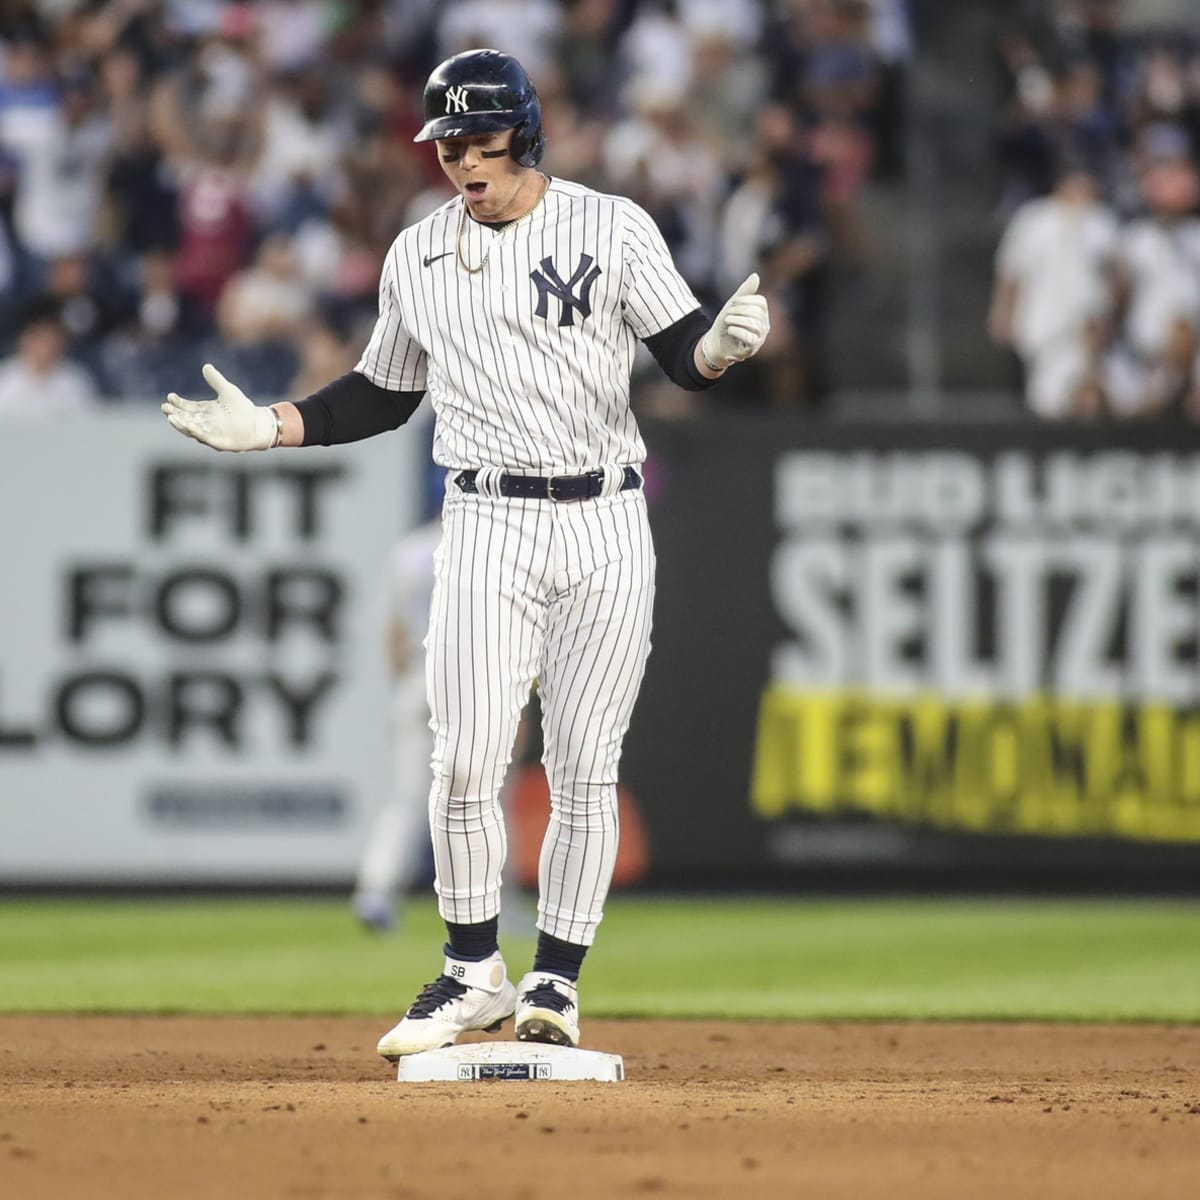 Clint Frazier is right. Yankees' facial hair ban should end